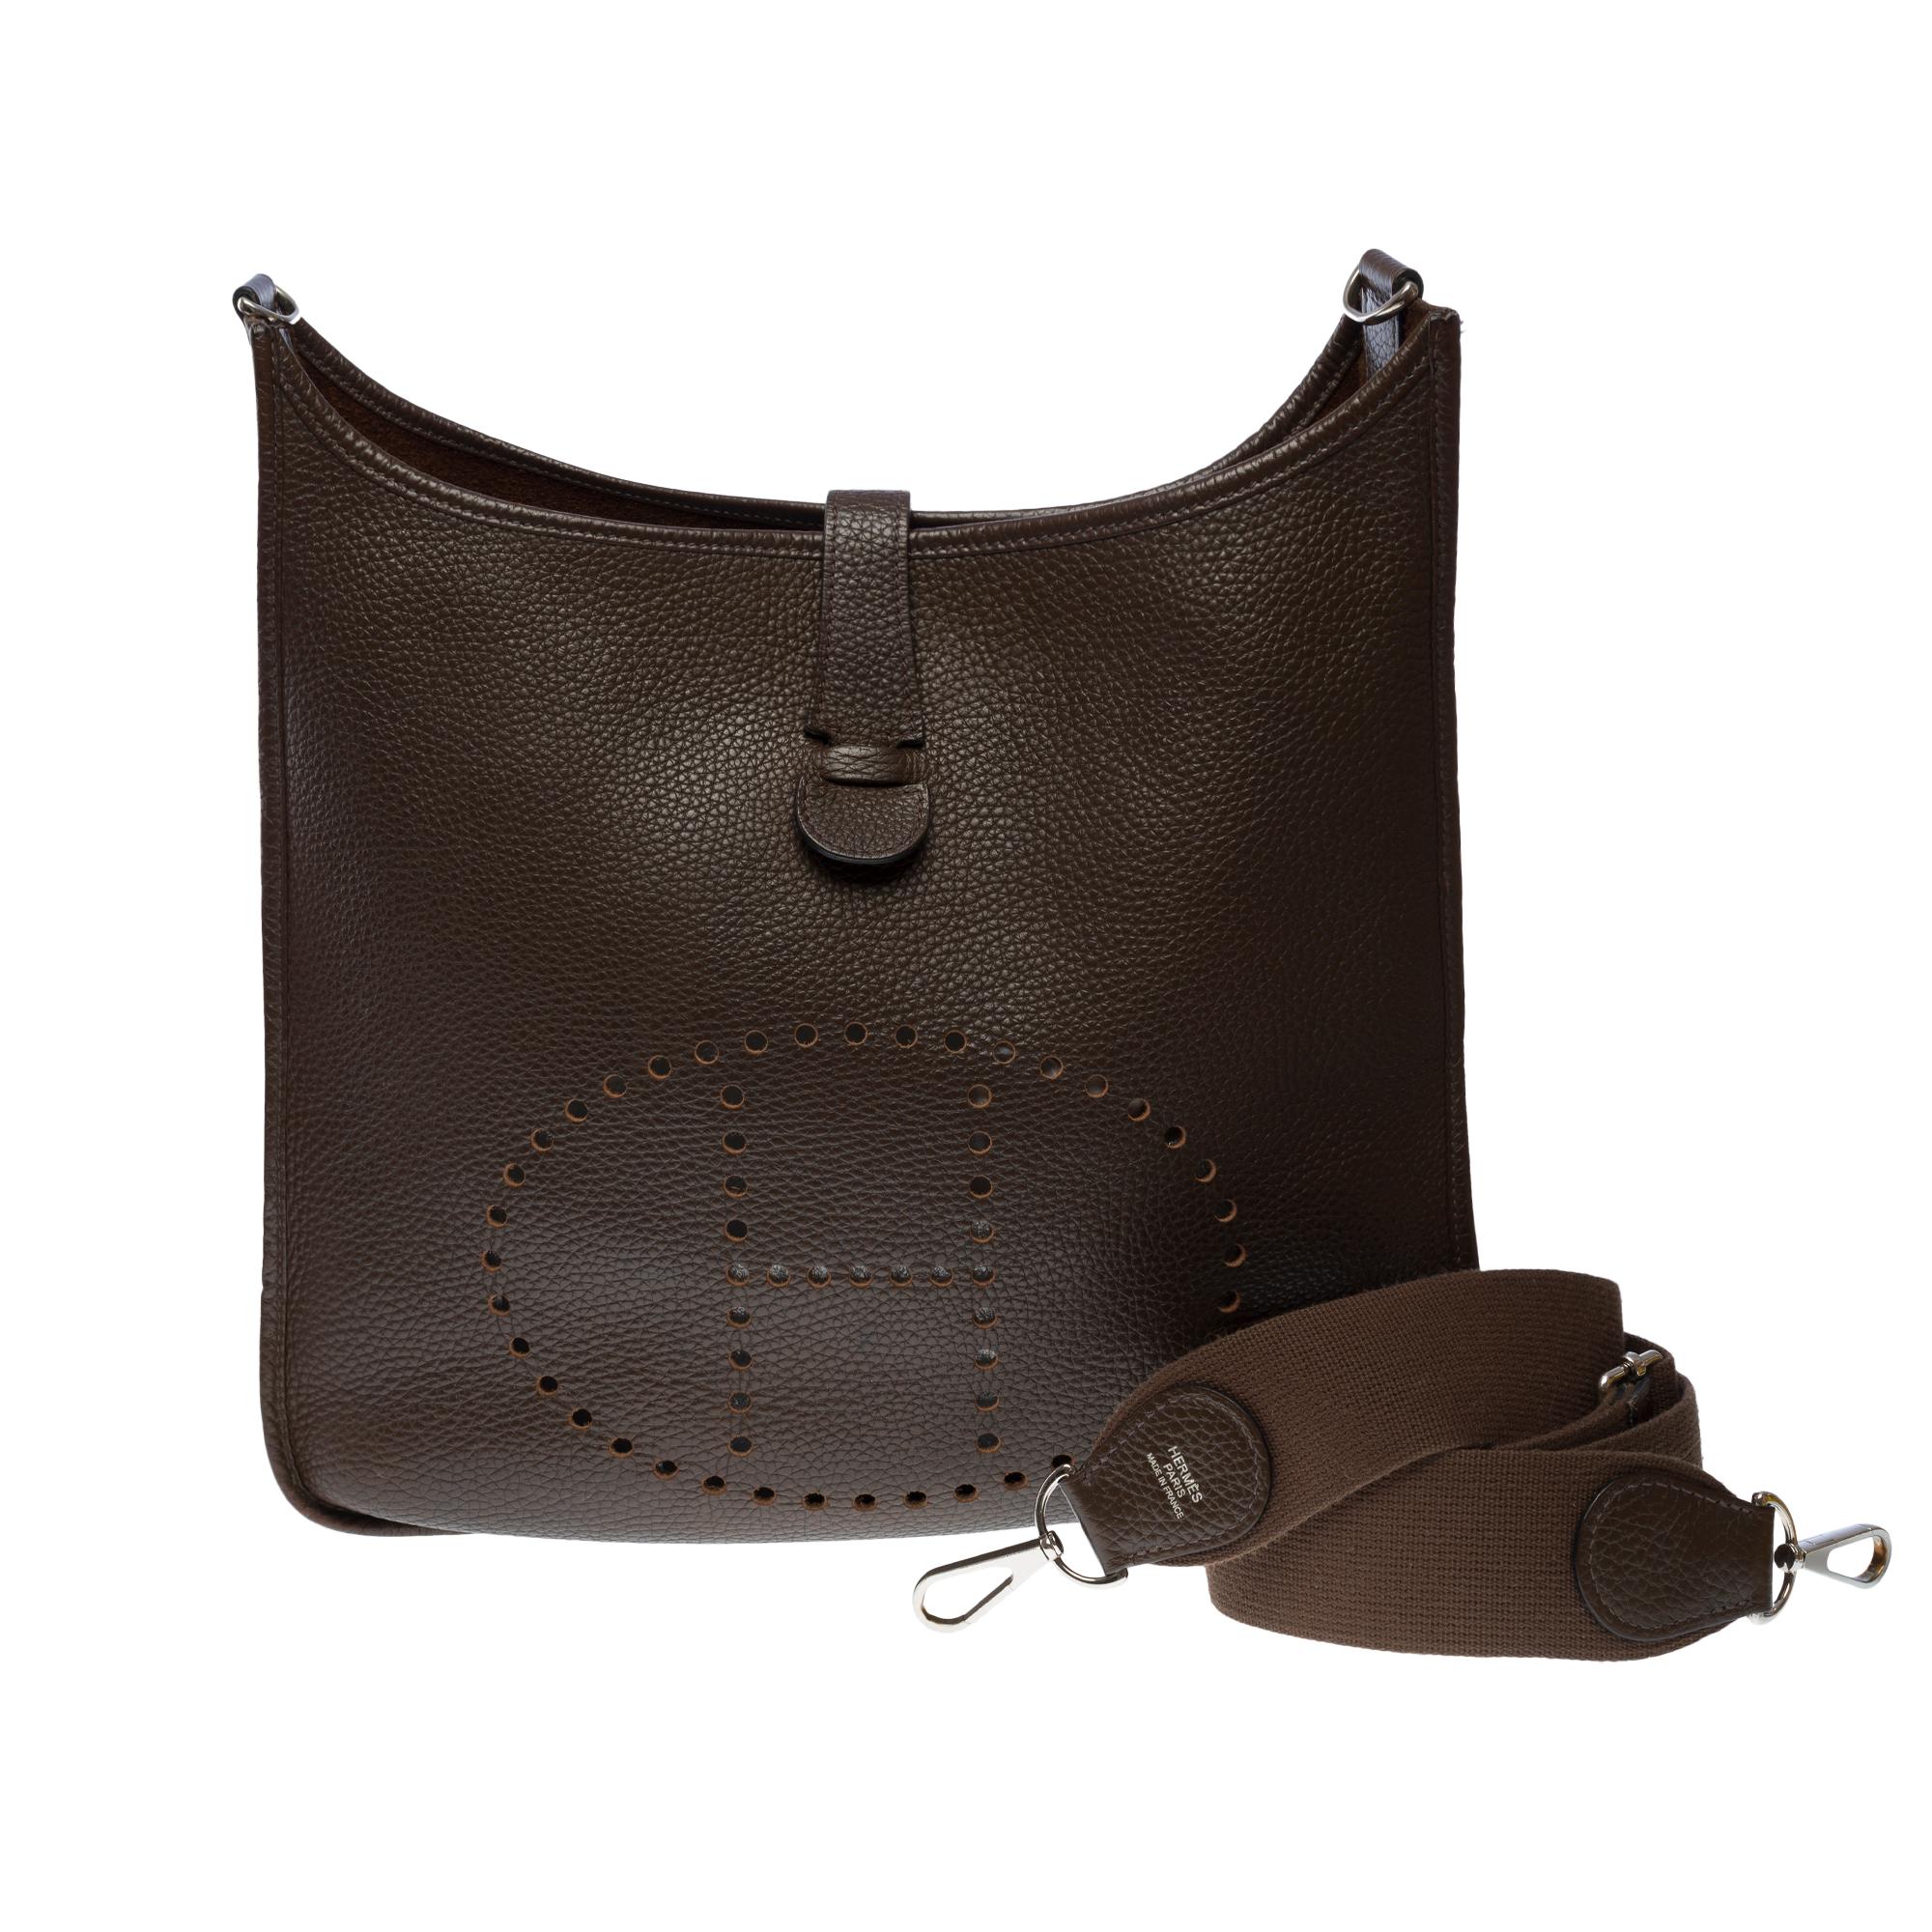 The Iconic Hermes Evelyne 33 shoulder bag in Brown Taurillon Clemence leather, silver metal hardware, a removable shoulder strap adjustable in brown canvas allowing a shoulder or crossbody carry

Closure by snap button on flap
Brown suede